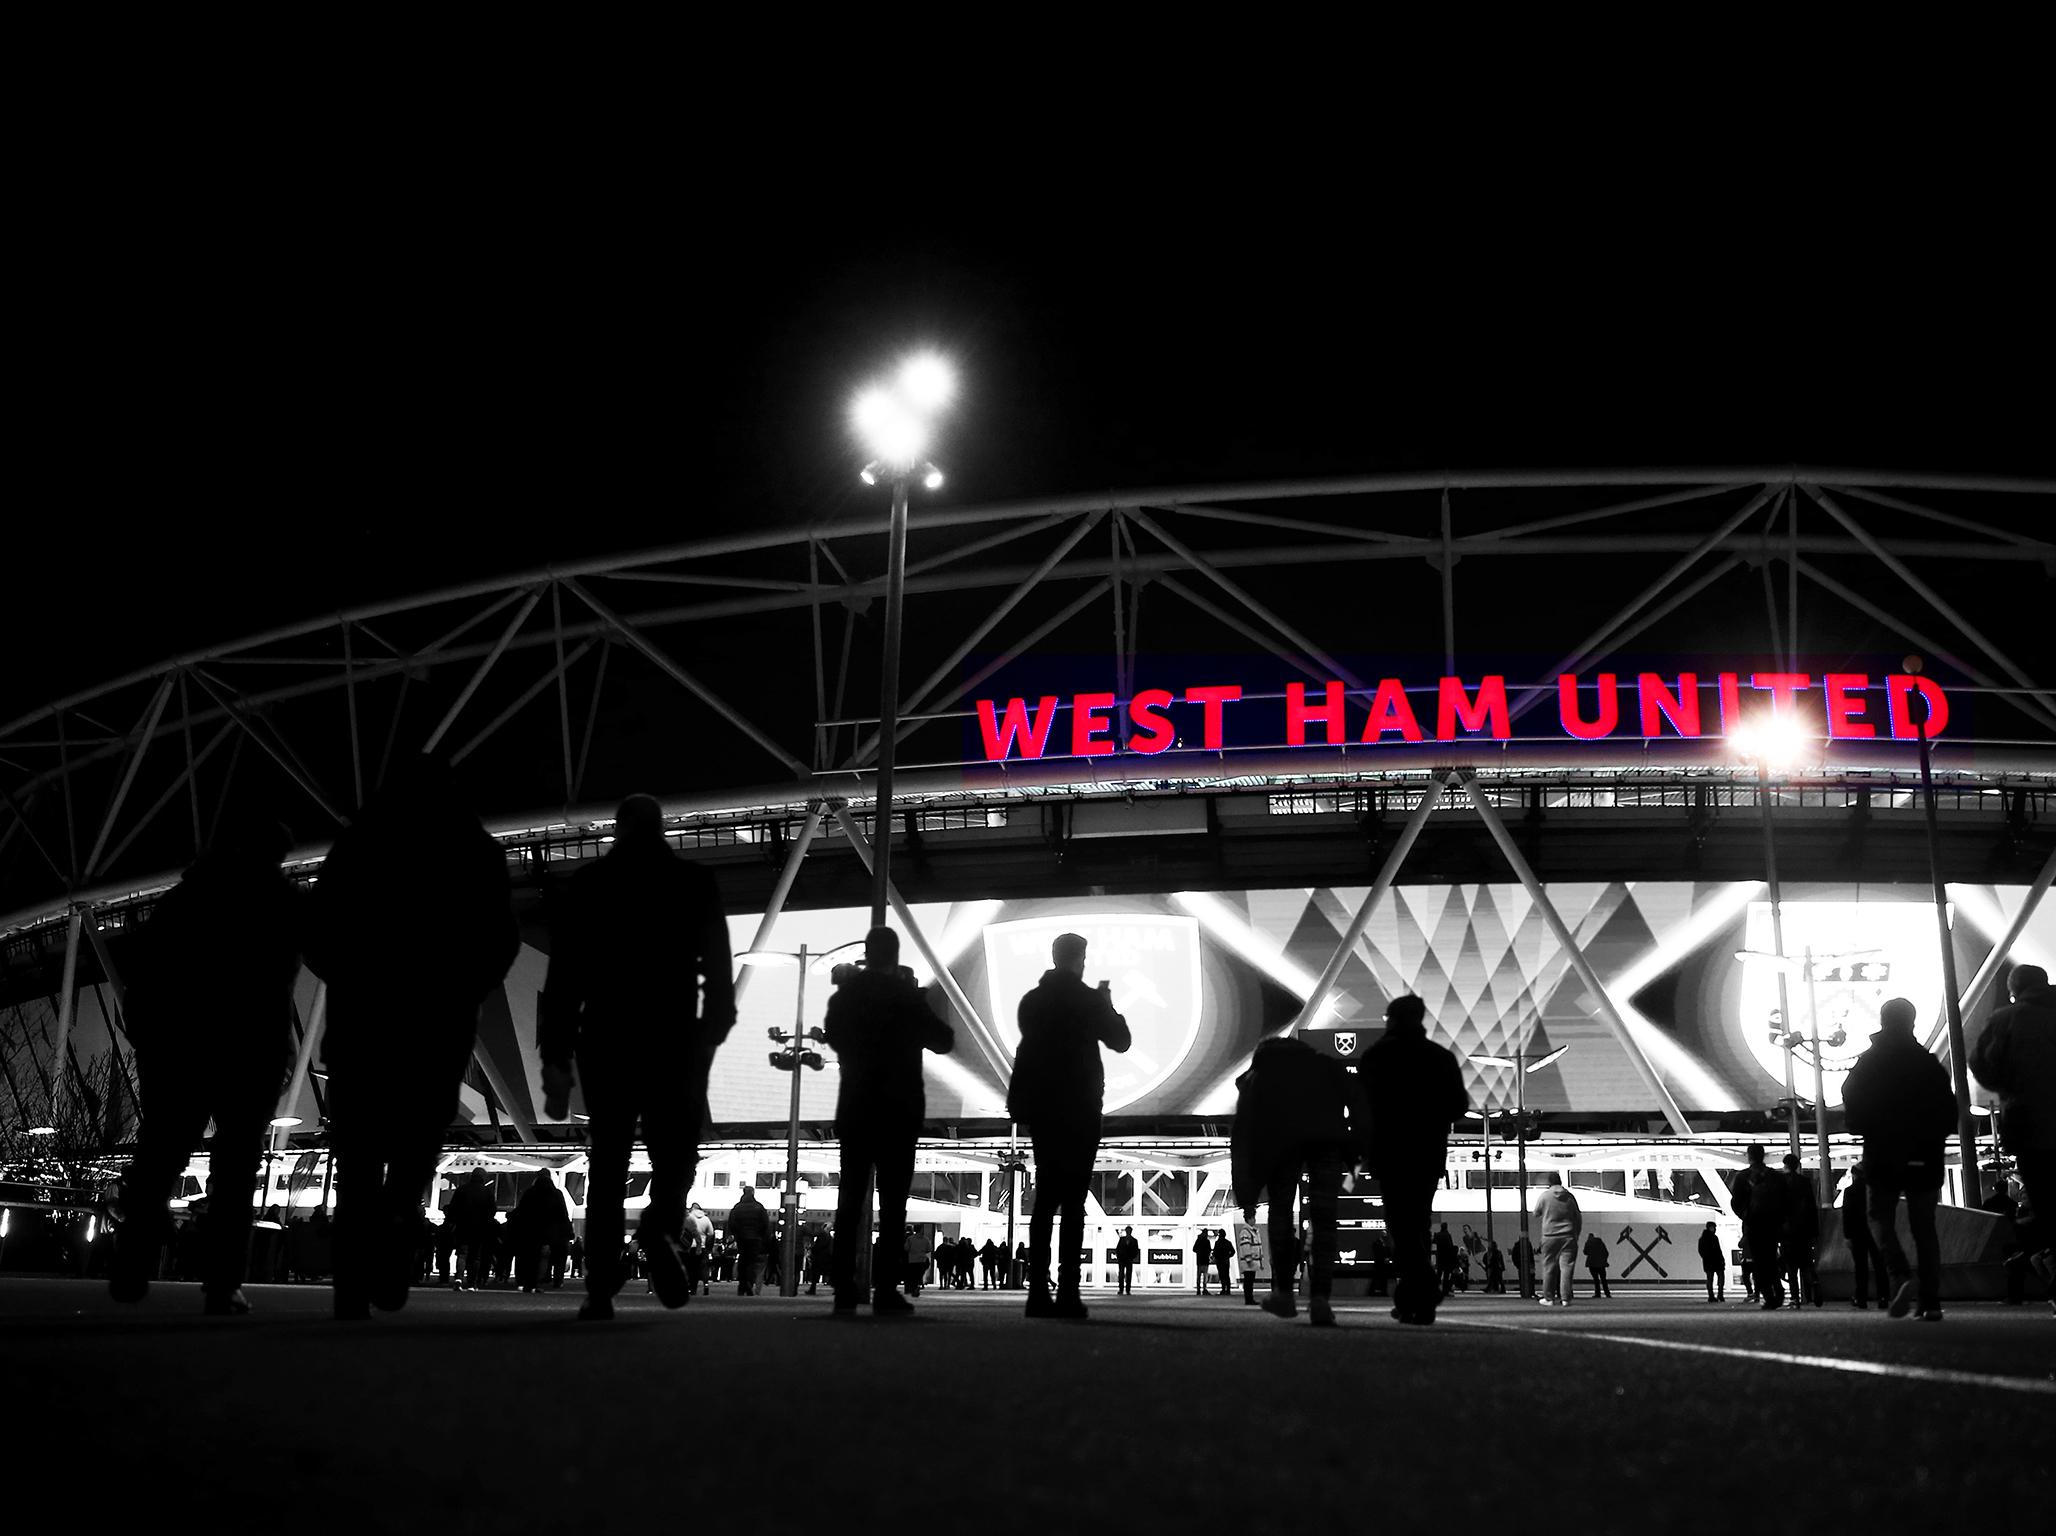 West Ham still met with controversial fan group despite being made aware of threats to other supporters